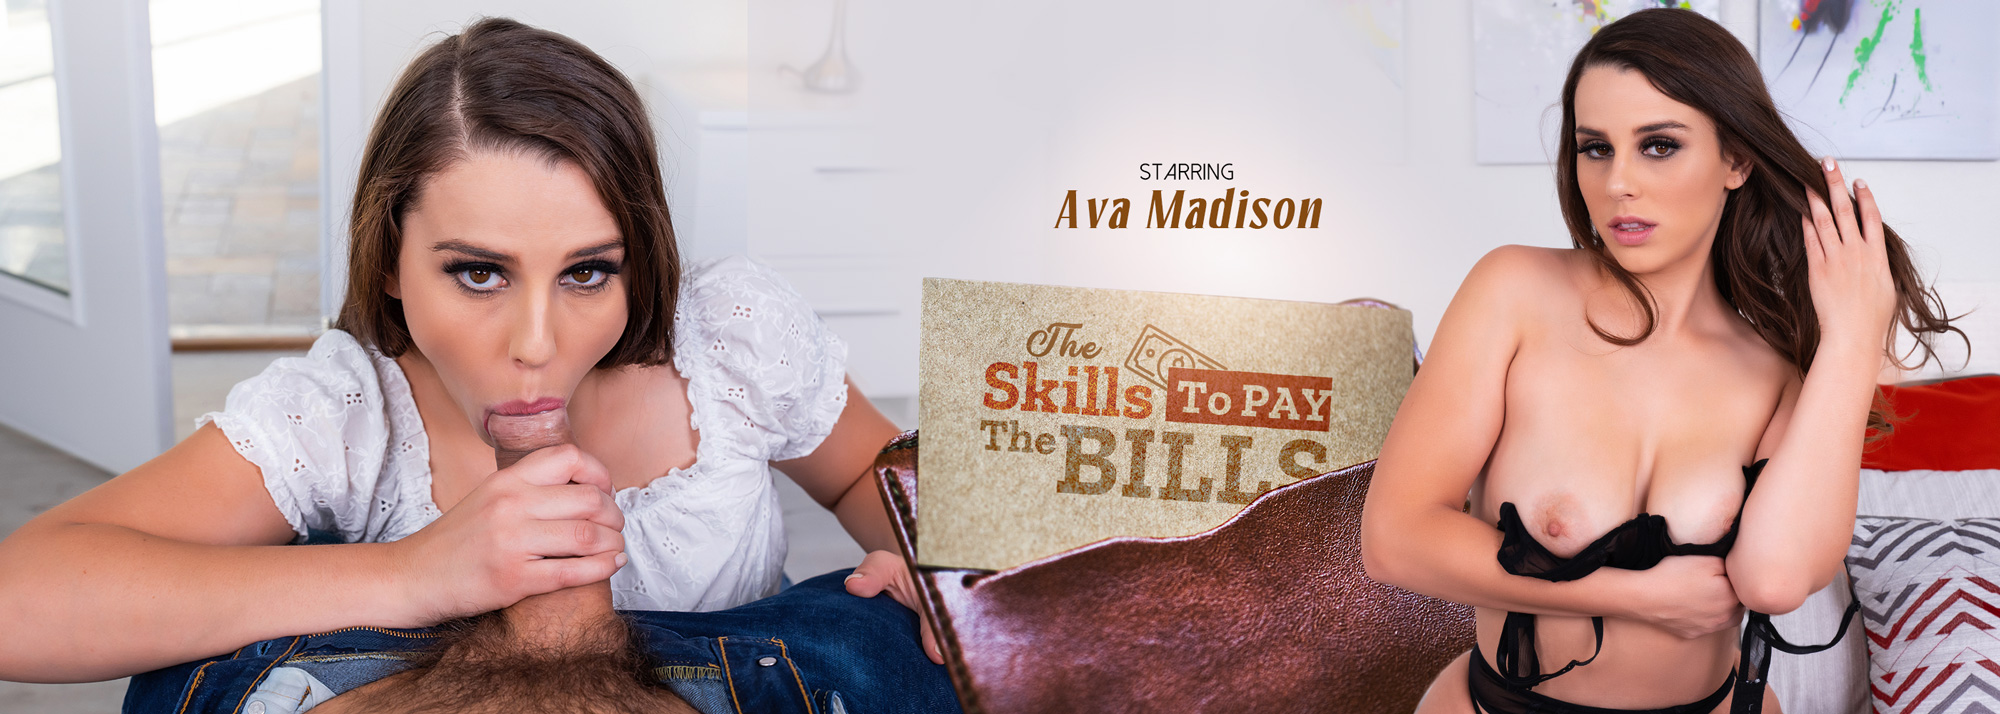 The Skills to Pay the Bills with Ava Madison  Slideshow